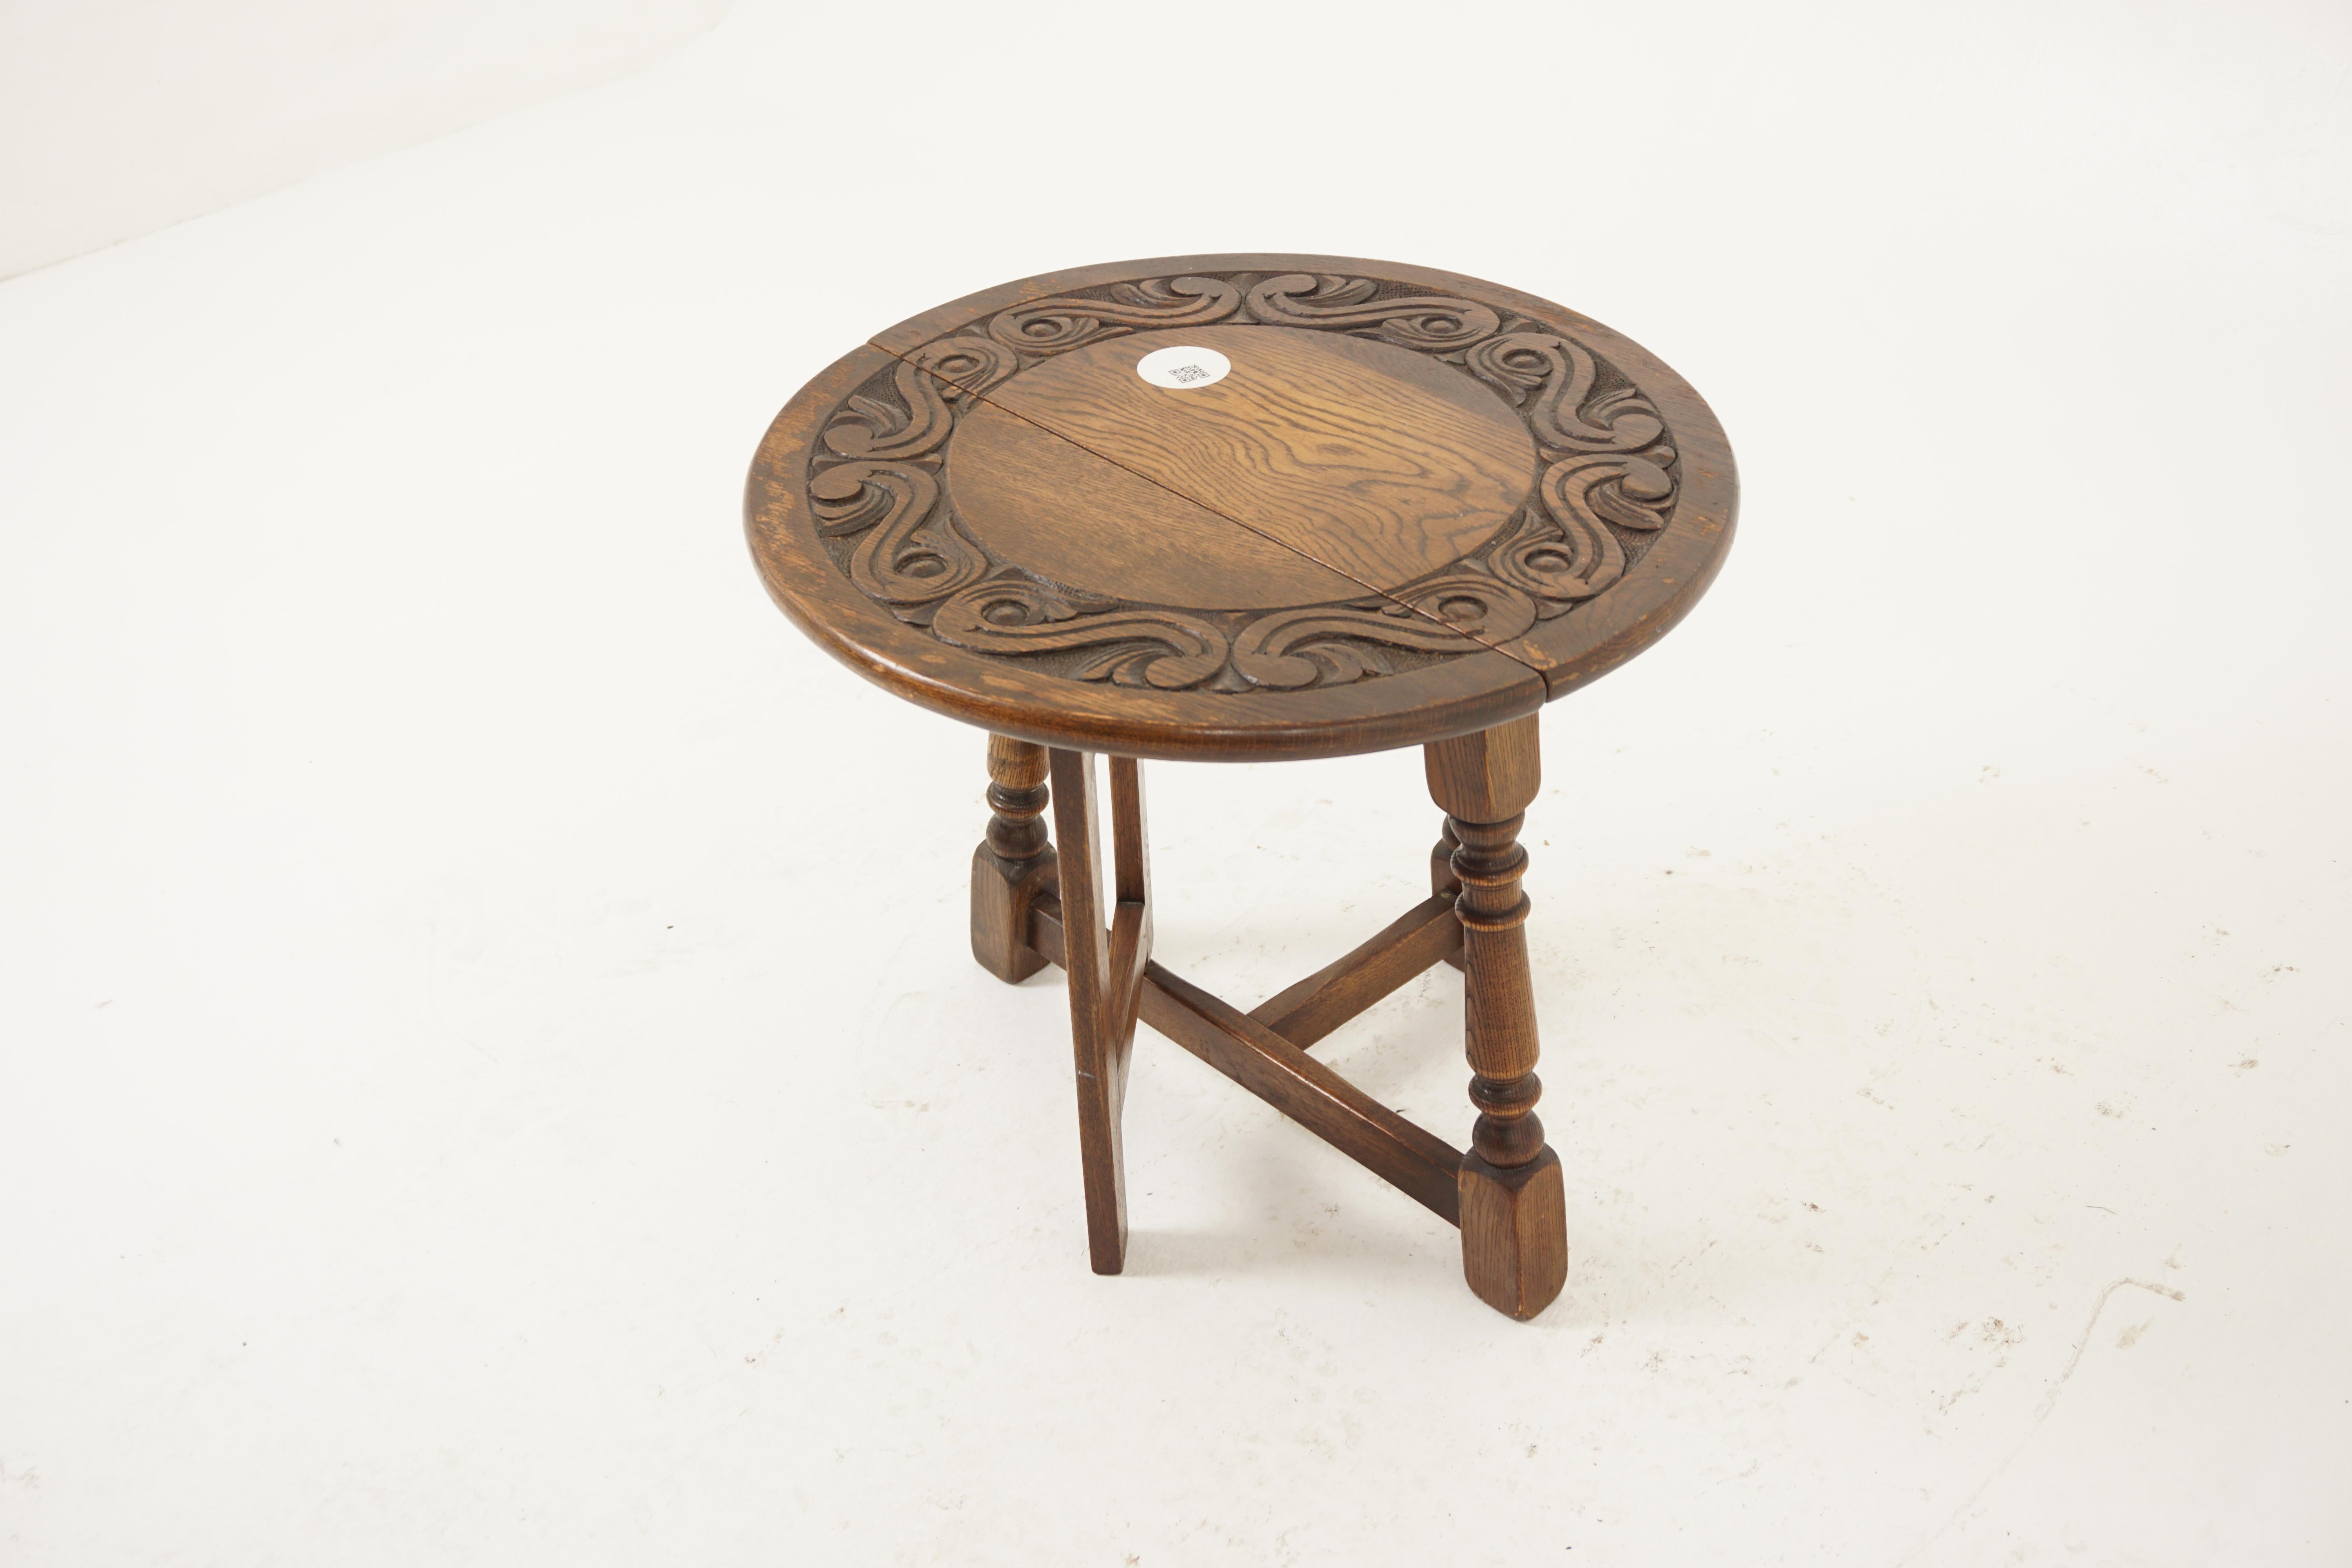 Antique Oak Gateleg, Petite Carved Circular Drop Leaf Table, Antique Furniture, Scotland 1930, H1097

+ Scotland 1930
+ Solid Oak
+ Original Finish
+ Deep carved circular top
+ Standing on three turned legs
+ Joined by stretchers
+ Drop leaf on one